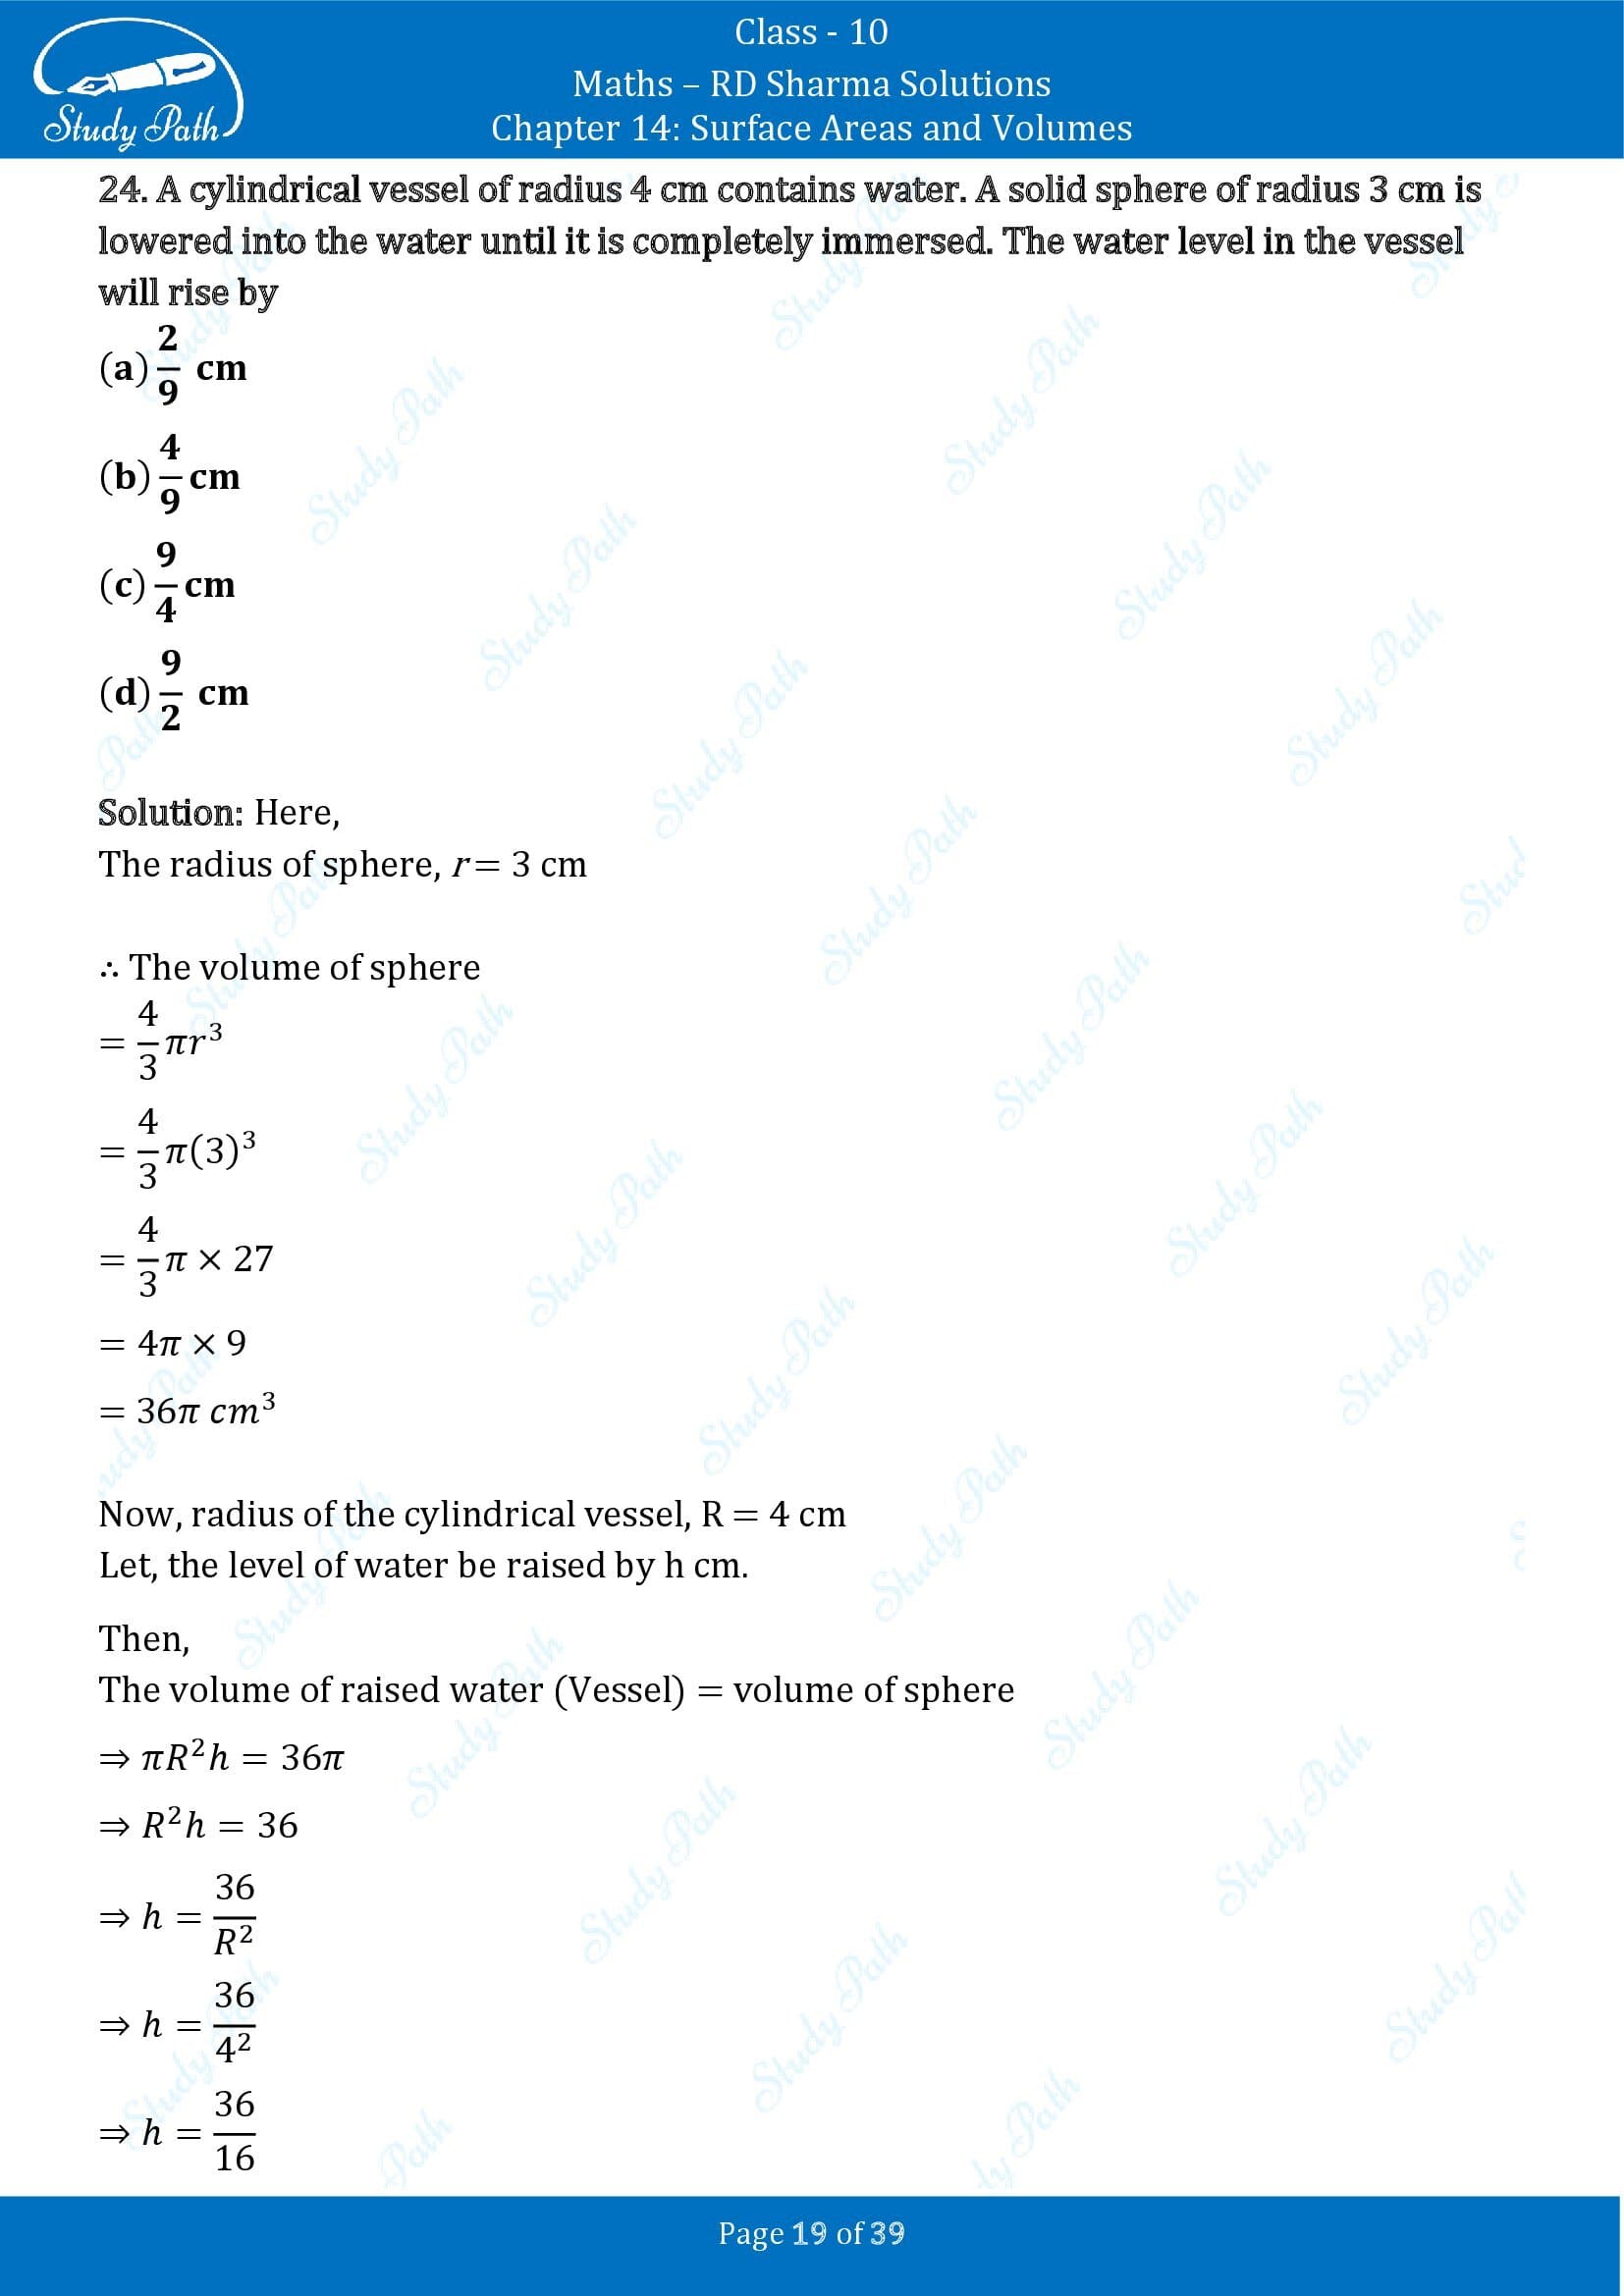 RD Sharma Solutions Class 10 Chapter 14 Surface Areas and Volumes Multiple Choice Question MCQs 00019